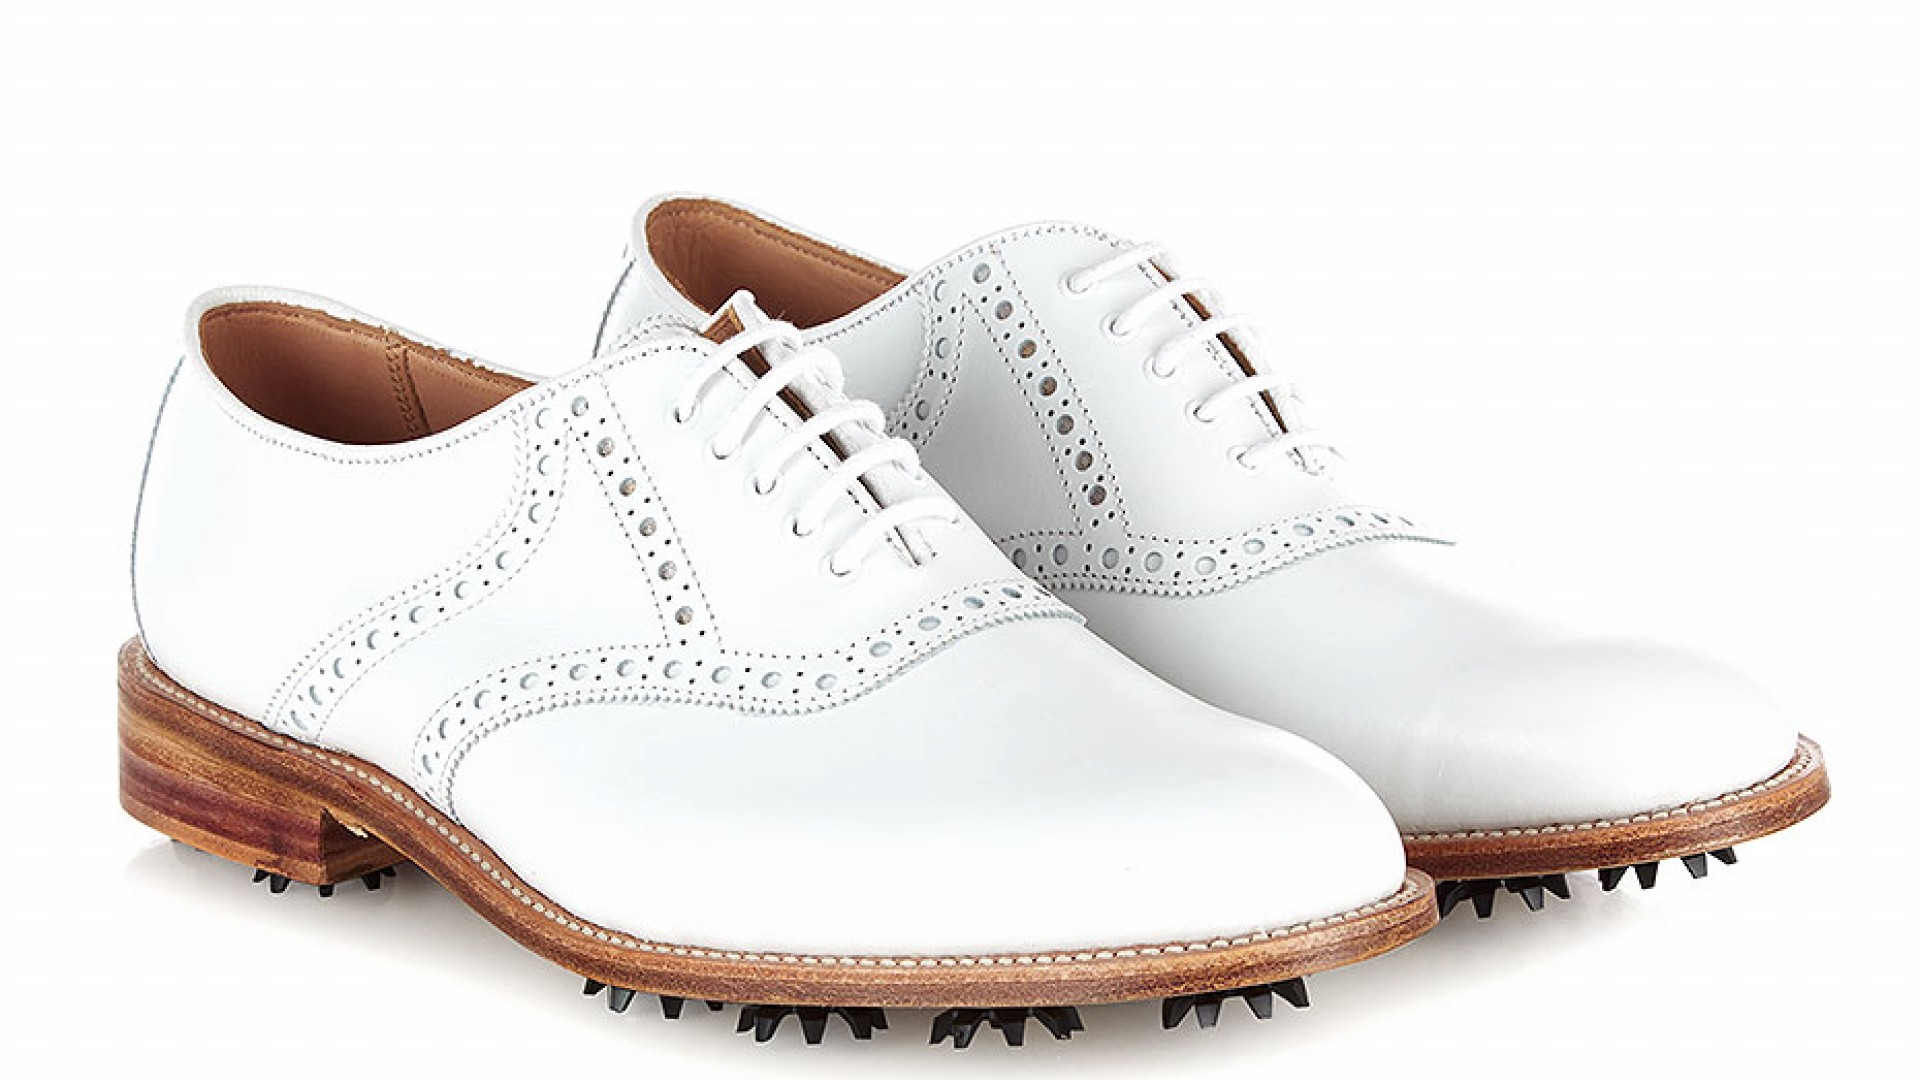 Wolsey & Tricker's collaborate on their first golf shoe | Square Mile